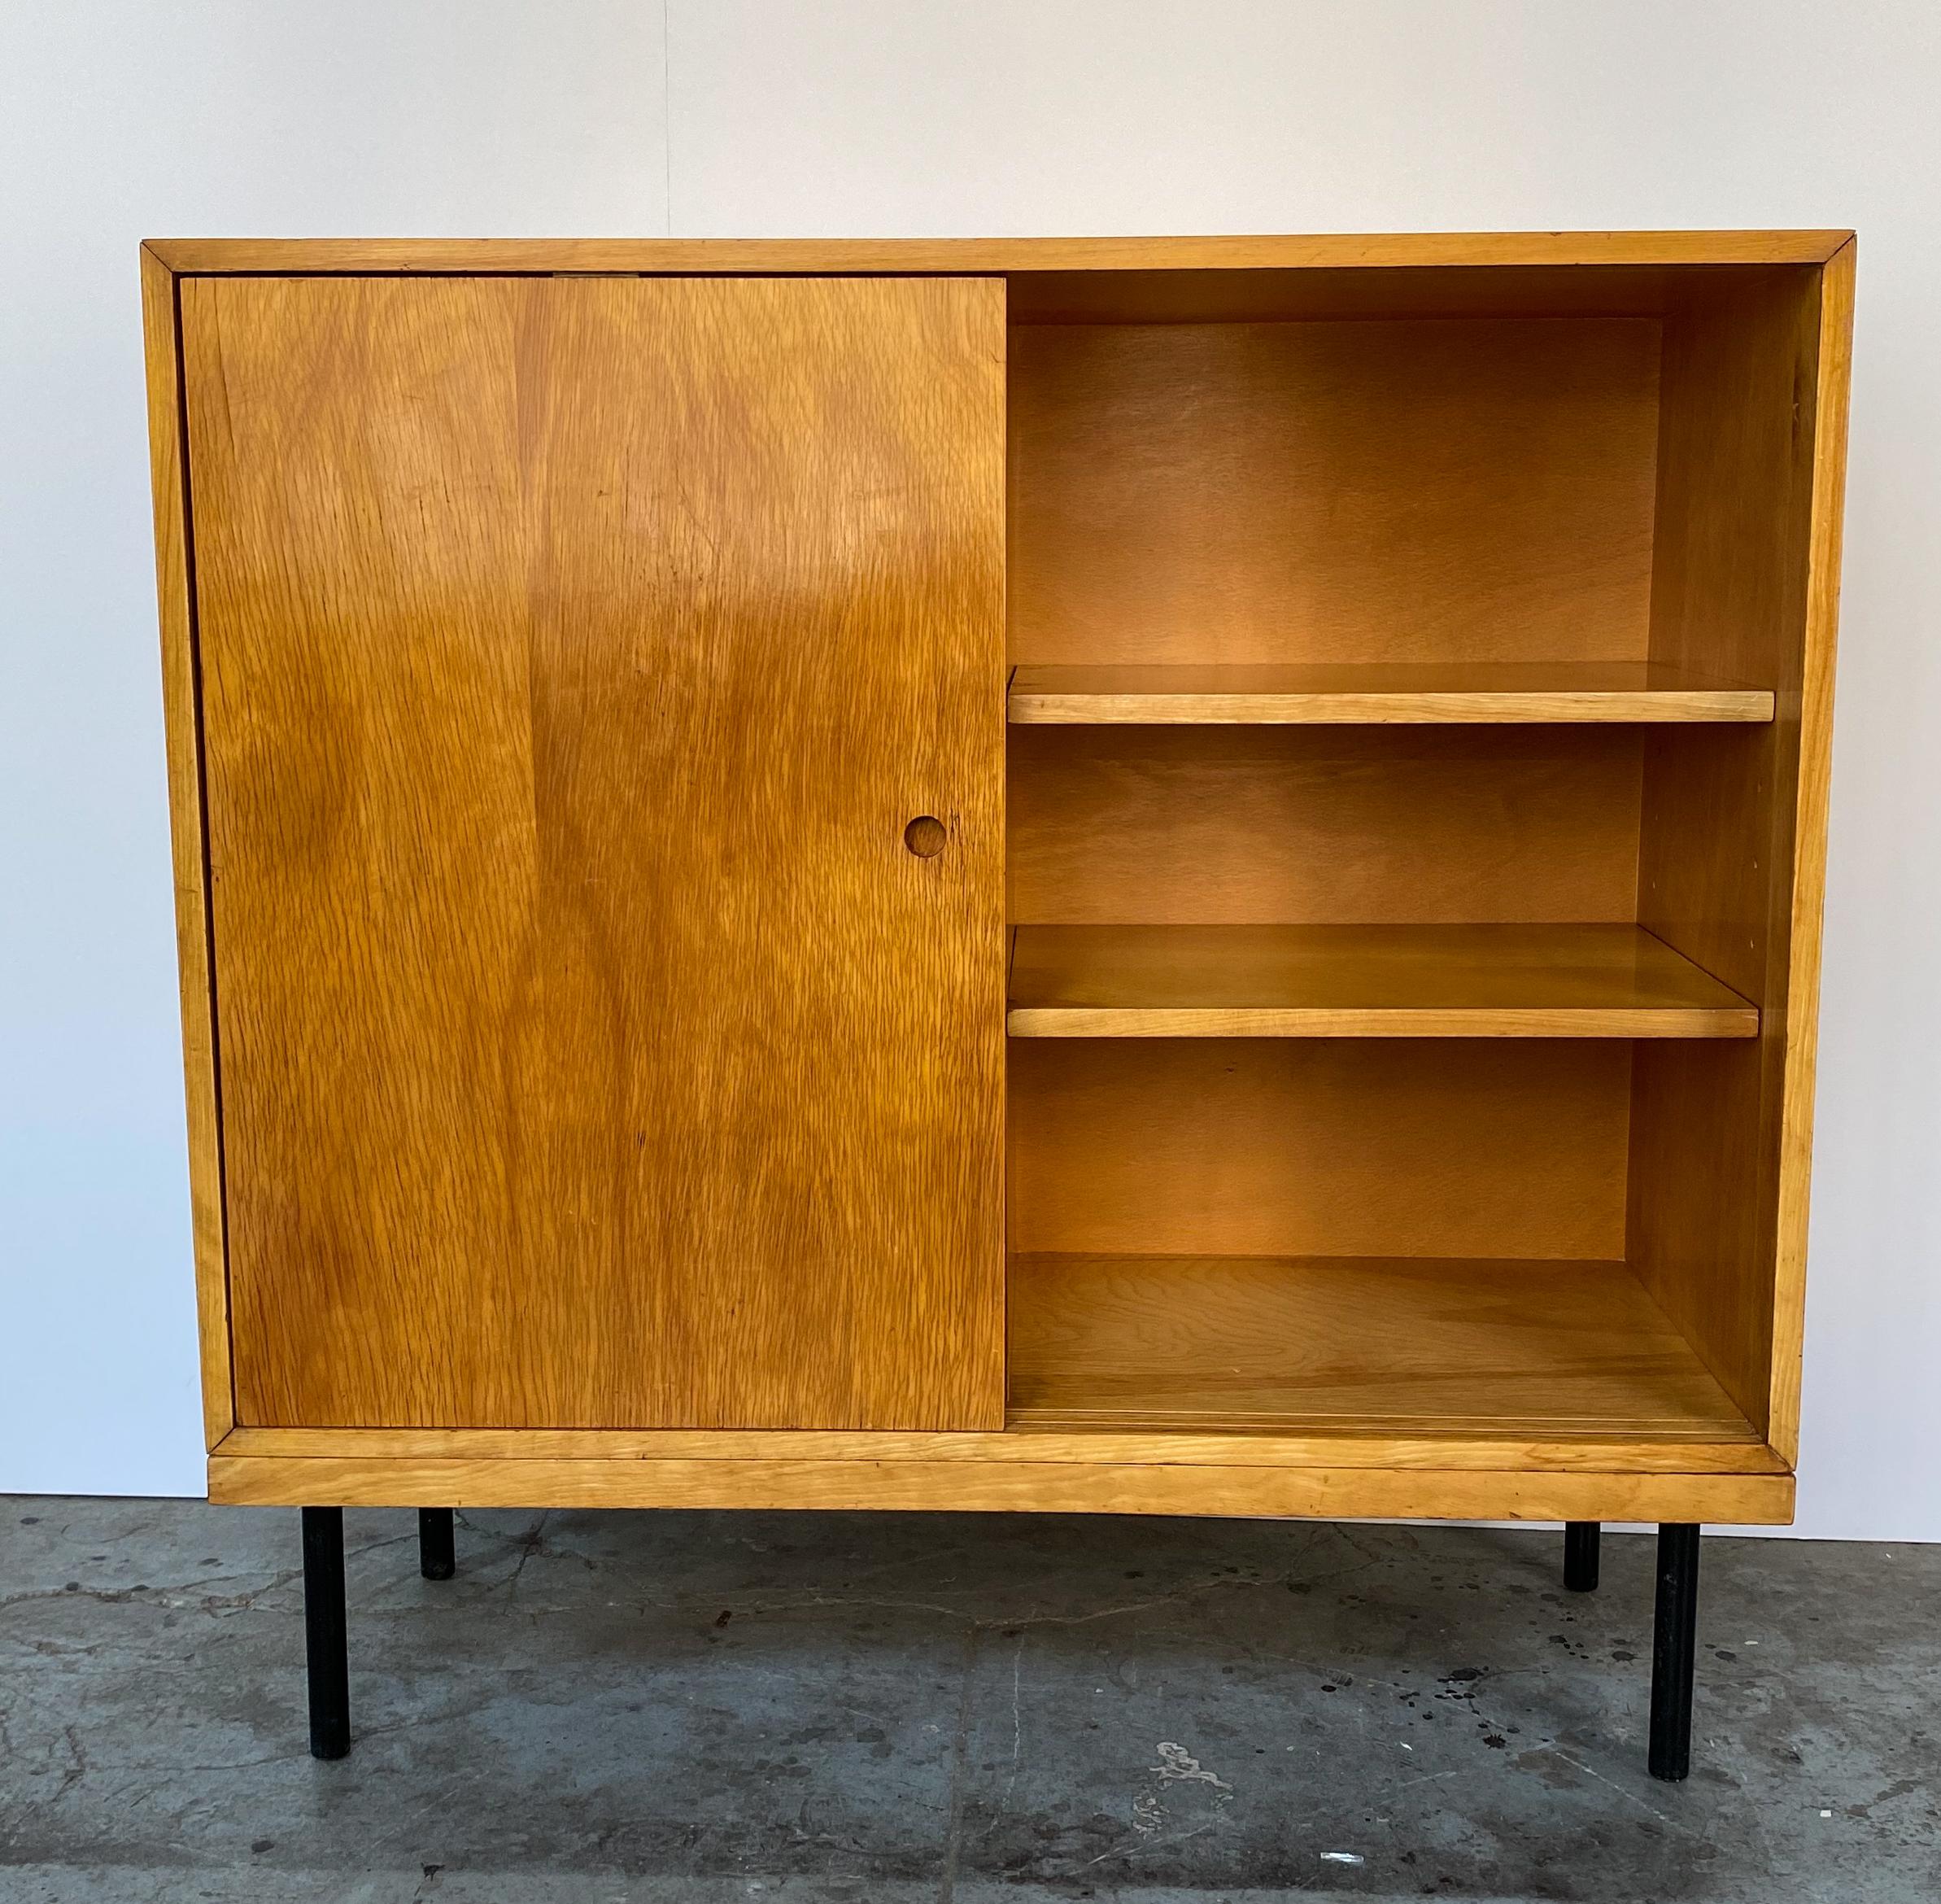 Custom and well-crafted modular sliding-door cabinet produced by Eric R.E. Schuster of the Art and Trade Shop of New York City in the early 1940s. Stylistically related to case goods designed for the MoMA Organic Design in Home Furnishings